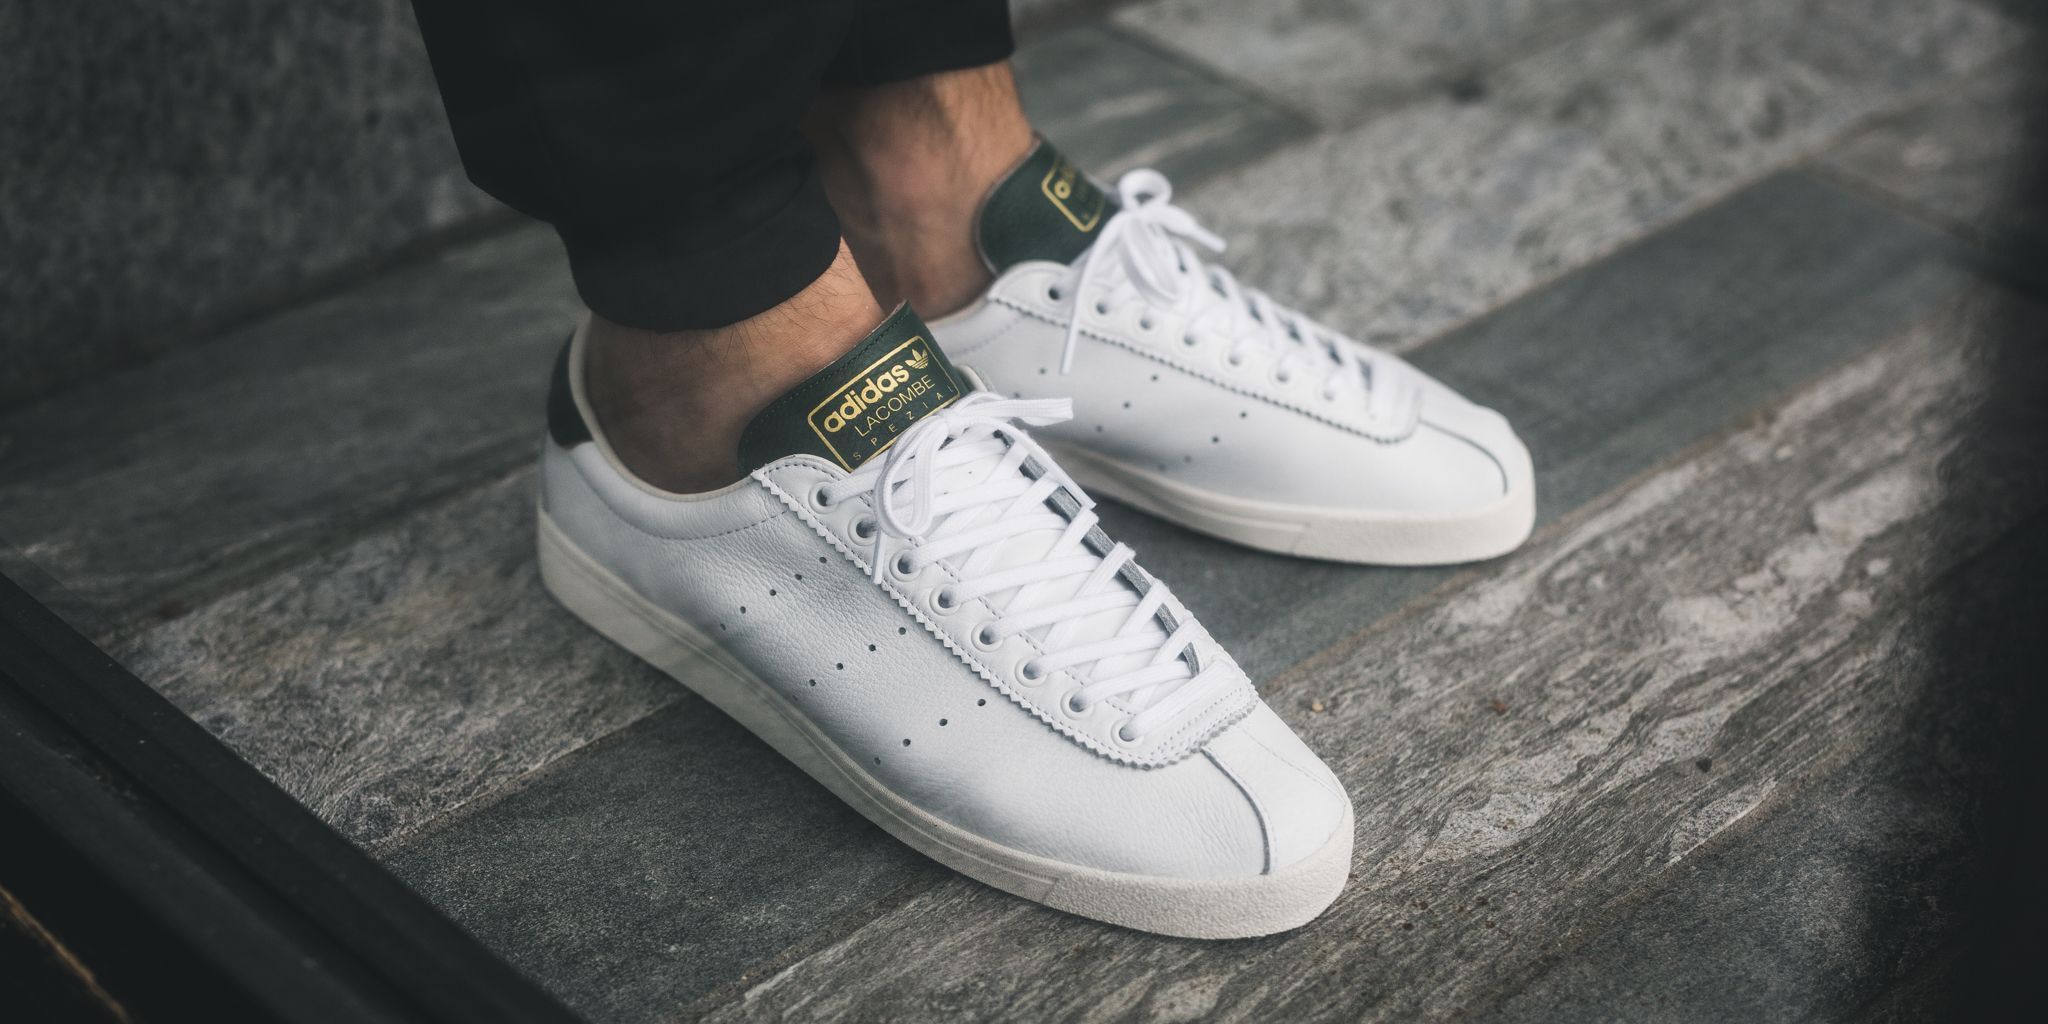 Titolo Twitter: "ONLINE NOW 🎾 Adidas Lacombe #Spezial "White" SHOP HERE ➡️ https://t.co/lC6pgZBmc4 #adidas https://t.co/QYwOTQsqm3" / Twitter